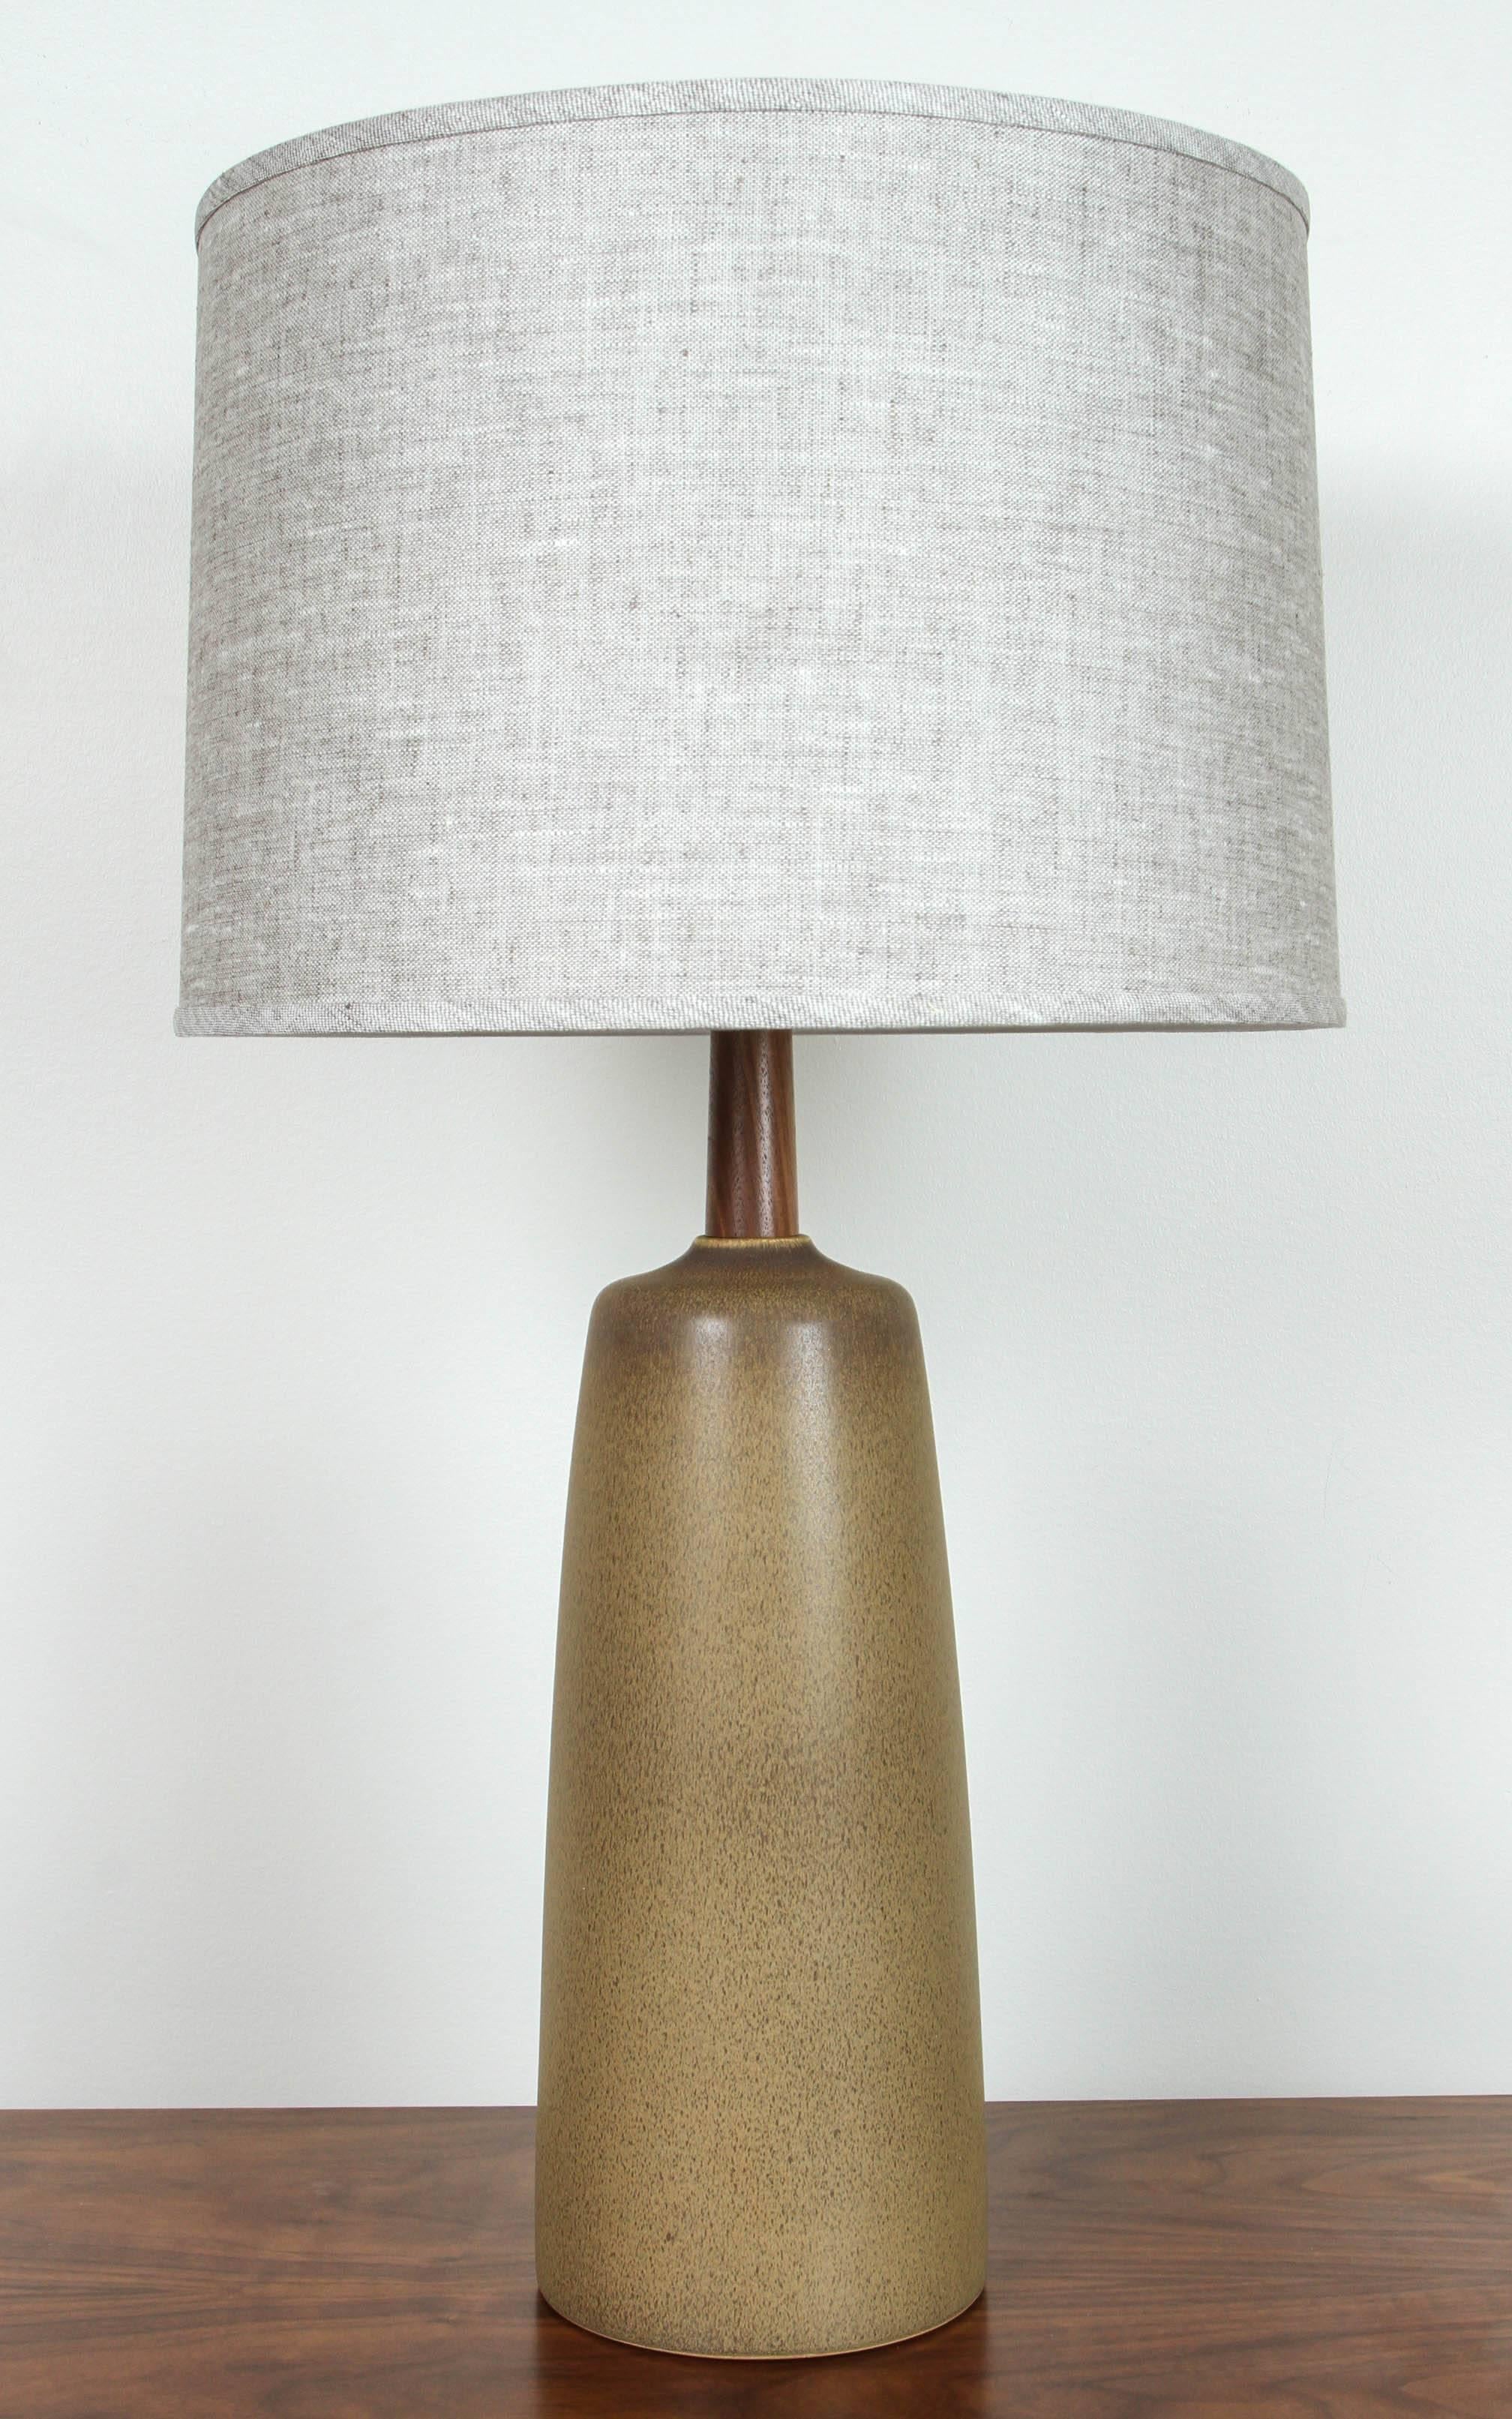 Mid-Century Modern Pair of Tor Lamps by Stone and Sawyer for Lawson-Fenning